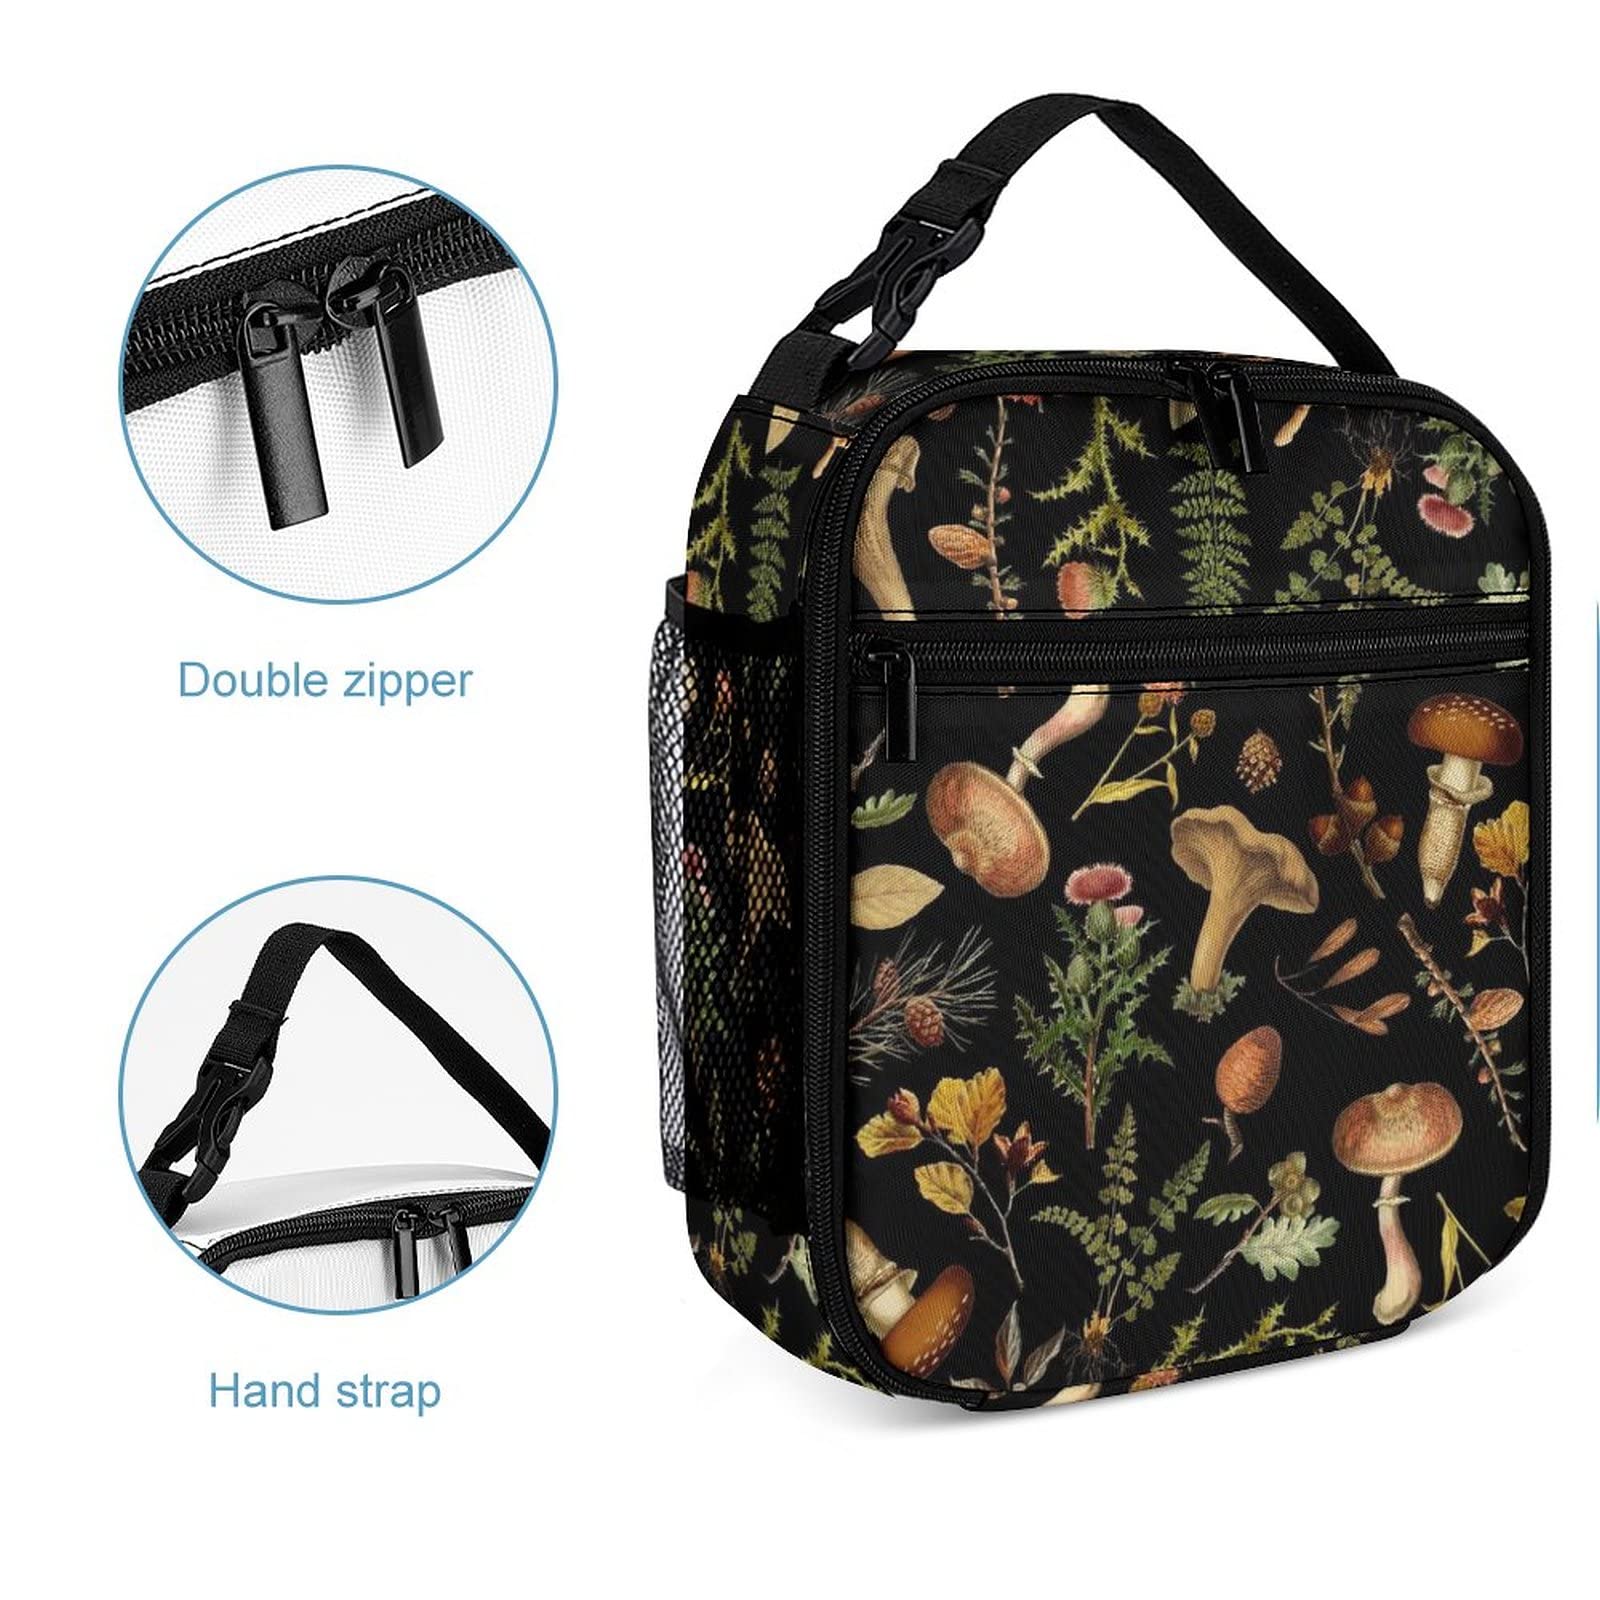 PEXISAOH Vintage Botanical Mushroom Woodland Garden Reusable Insulated Lunch Bag for Women Men Kids,Leakproof Portable Lunch Box with Side Pocket Durable Cooler Tote Bag for School Work Picnic Travel